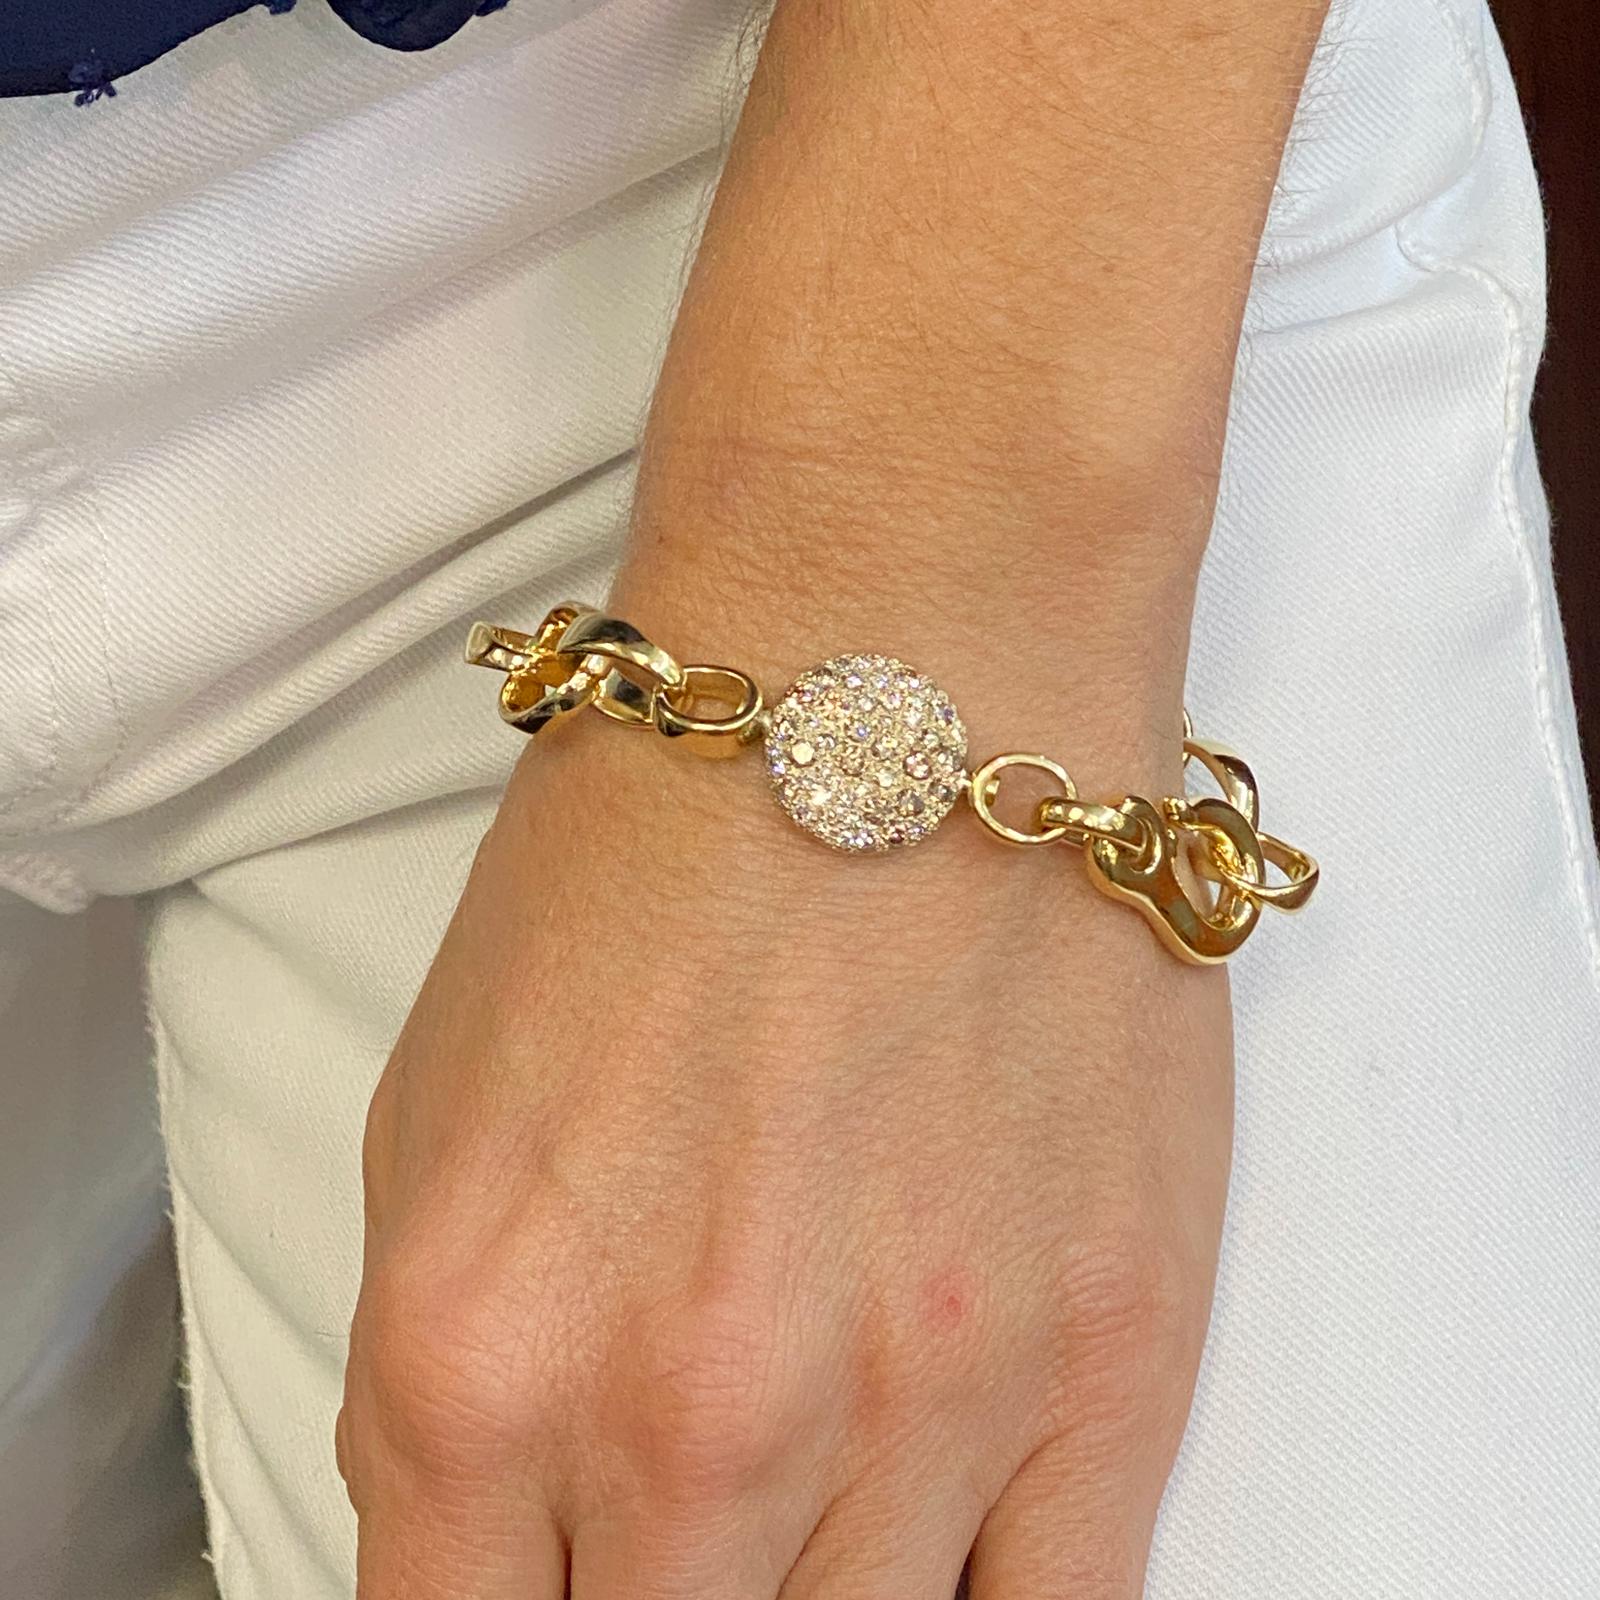 Stylish diamond link bracelet by Italian designer Pomellato fashioned in 18 karat yellow gold. The open link bracelet this S hook closure features round brilliant cut white and champagne diamonds weighing approximately 1.89 carat total weight. The